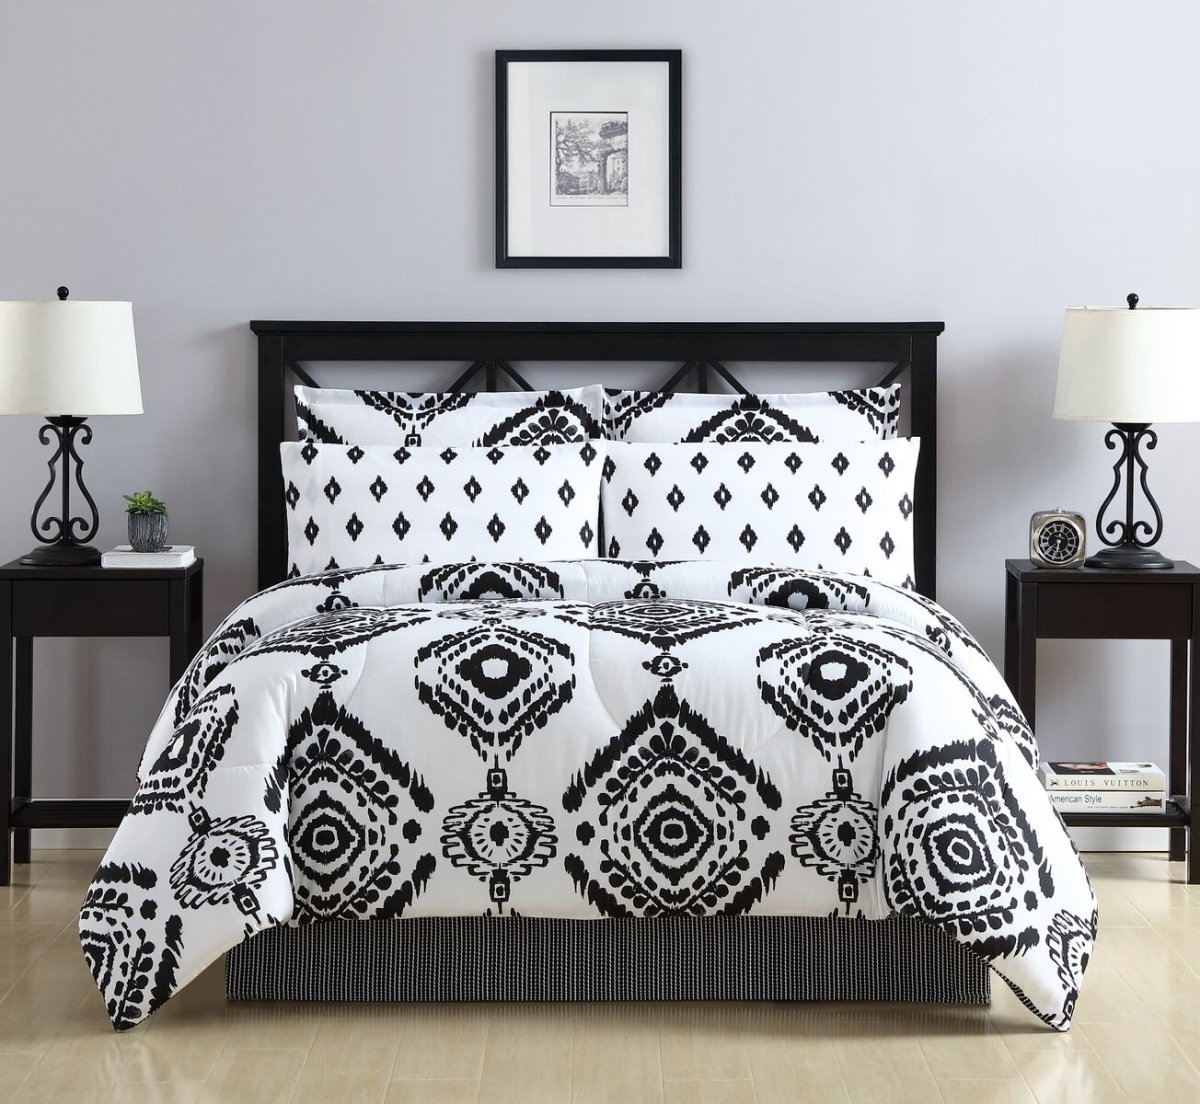 19341804bb-mul Navato Bed In A Bag Comforter Set, Black - King Size, 8 Piece